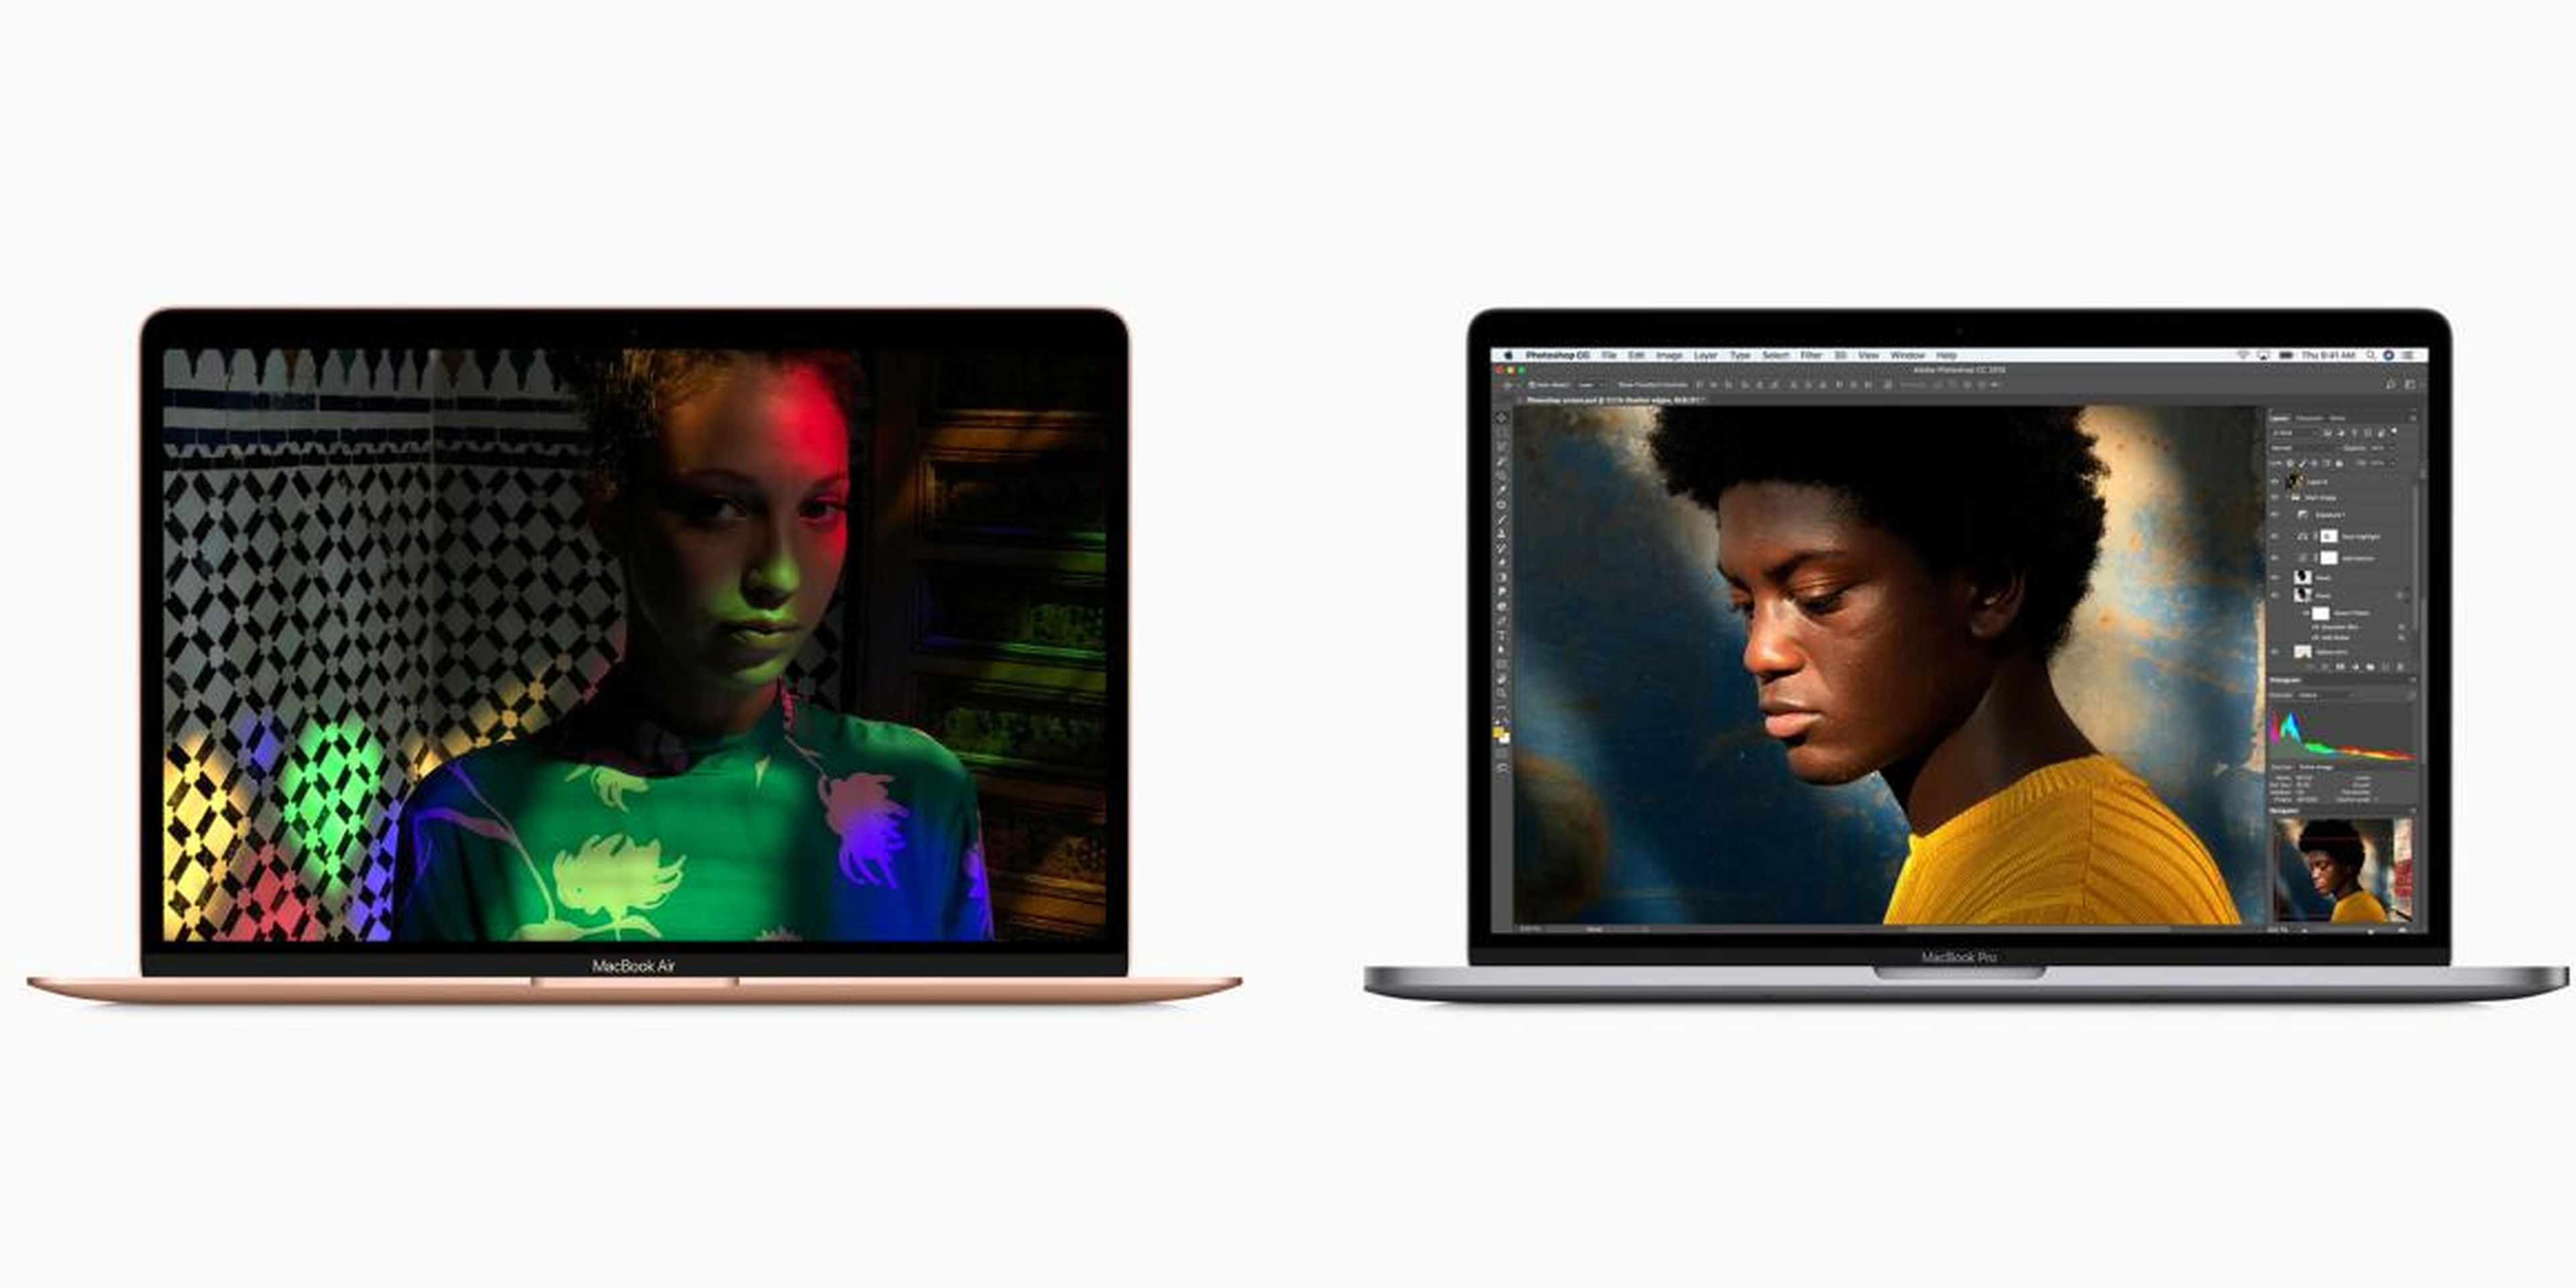 You won't really notice it that much, but the cheapest 13-inch MacBook Pro still has a slightly better screen.